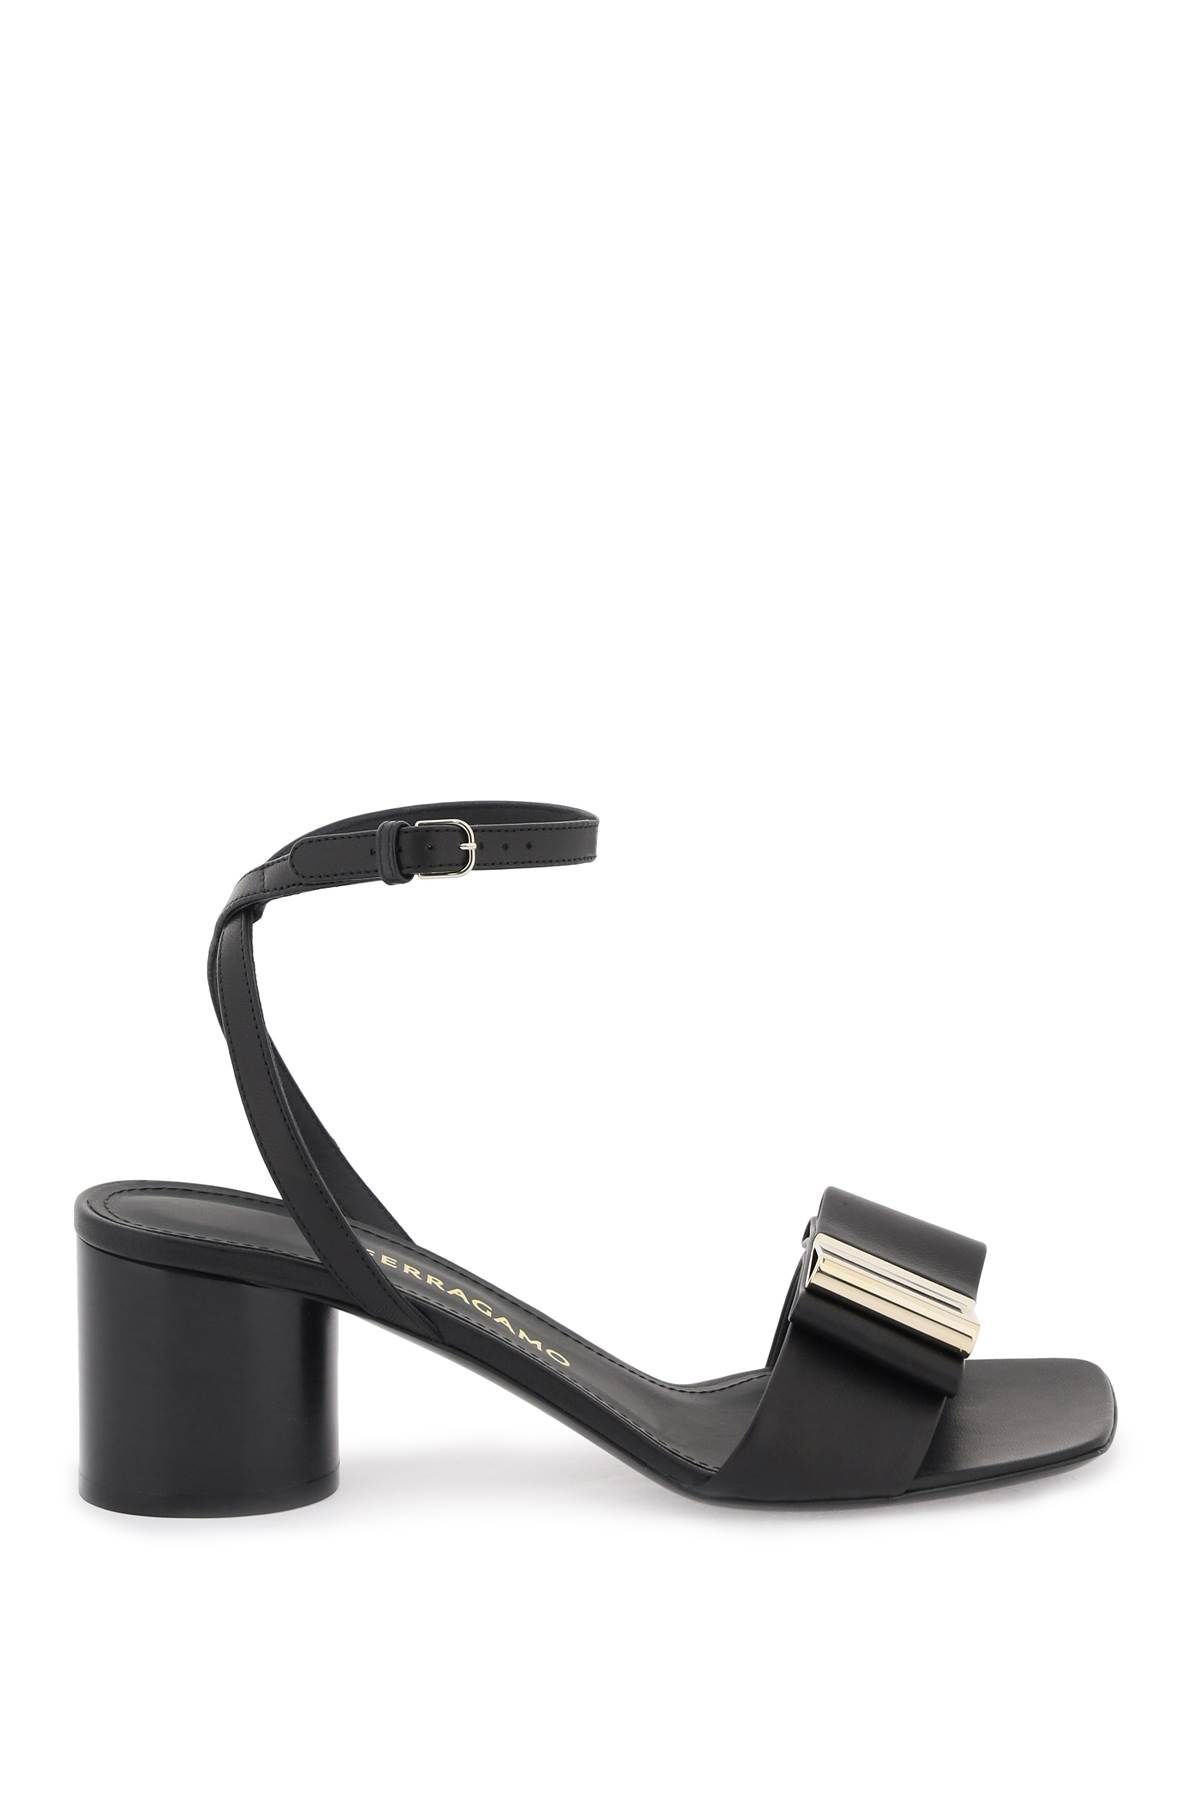 Shop Ferragamo Sandals With Double Bow In Black